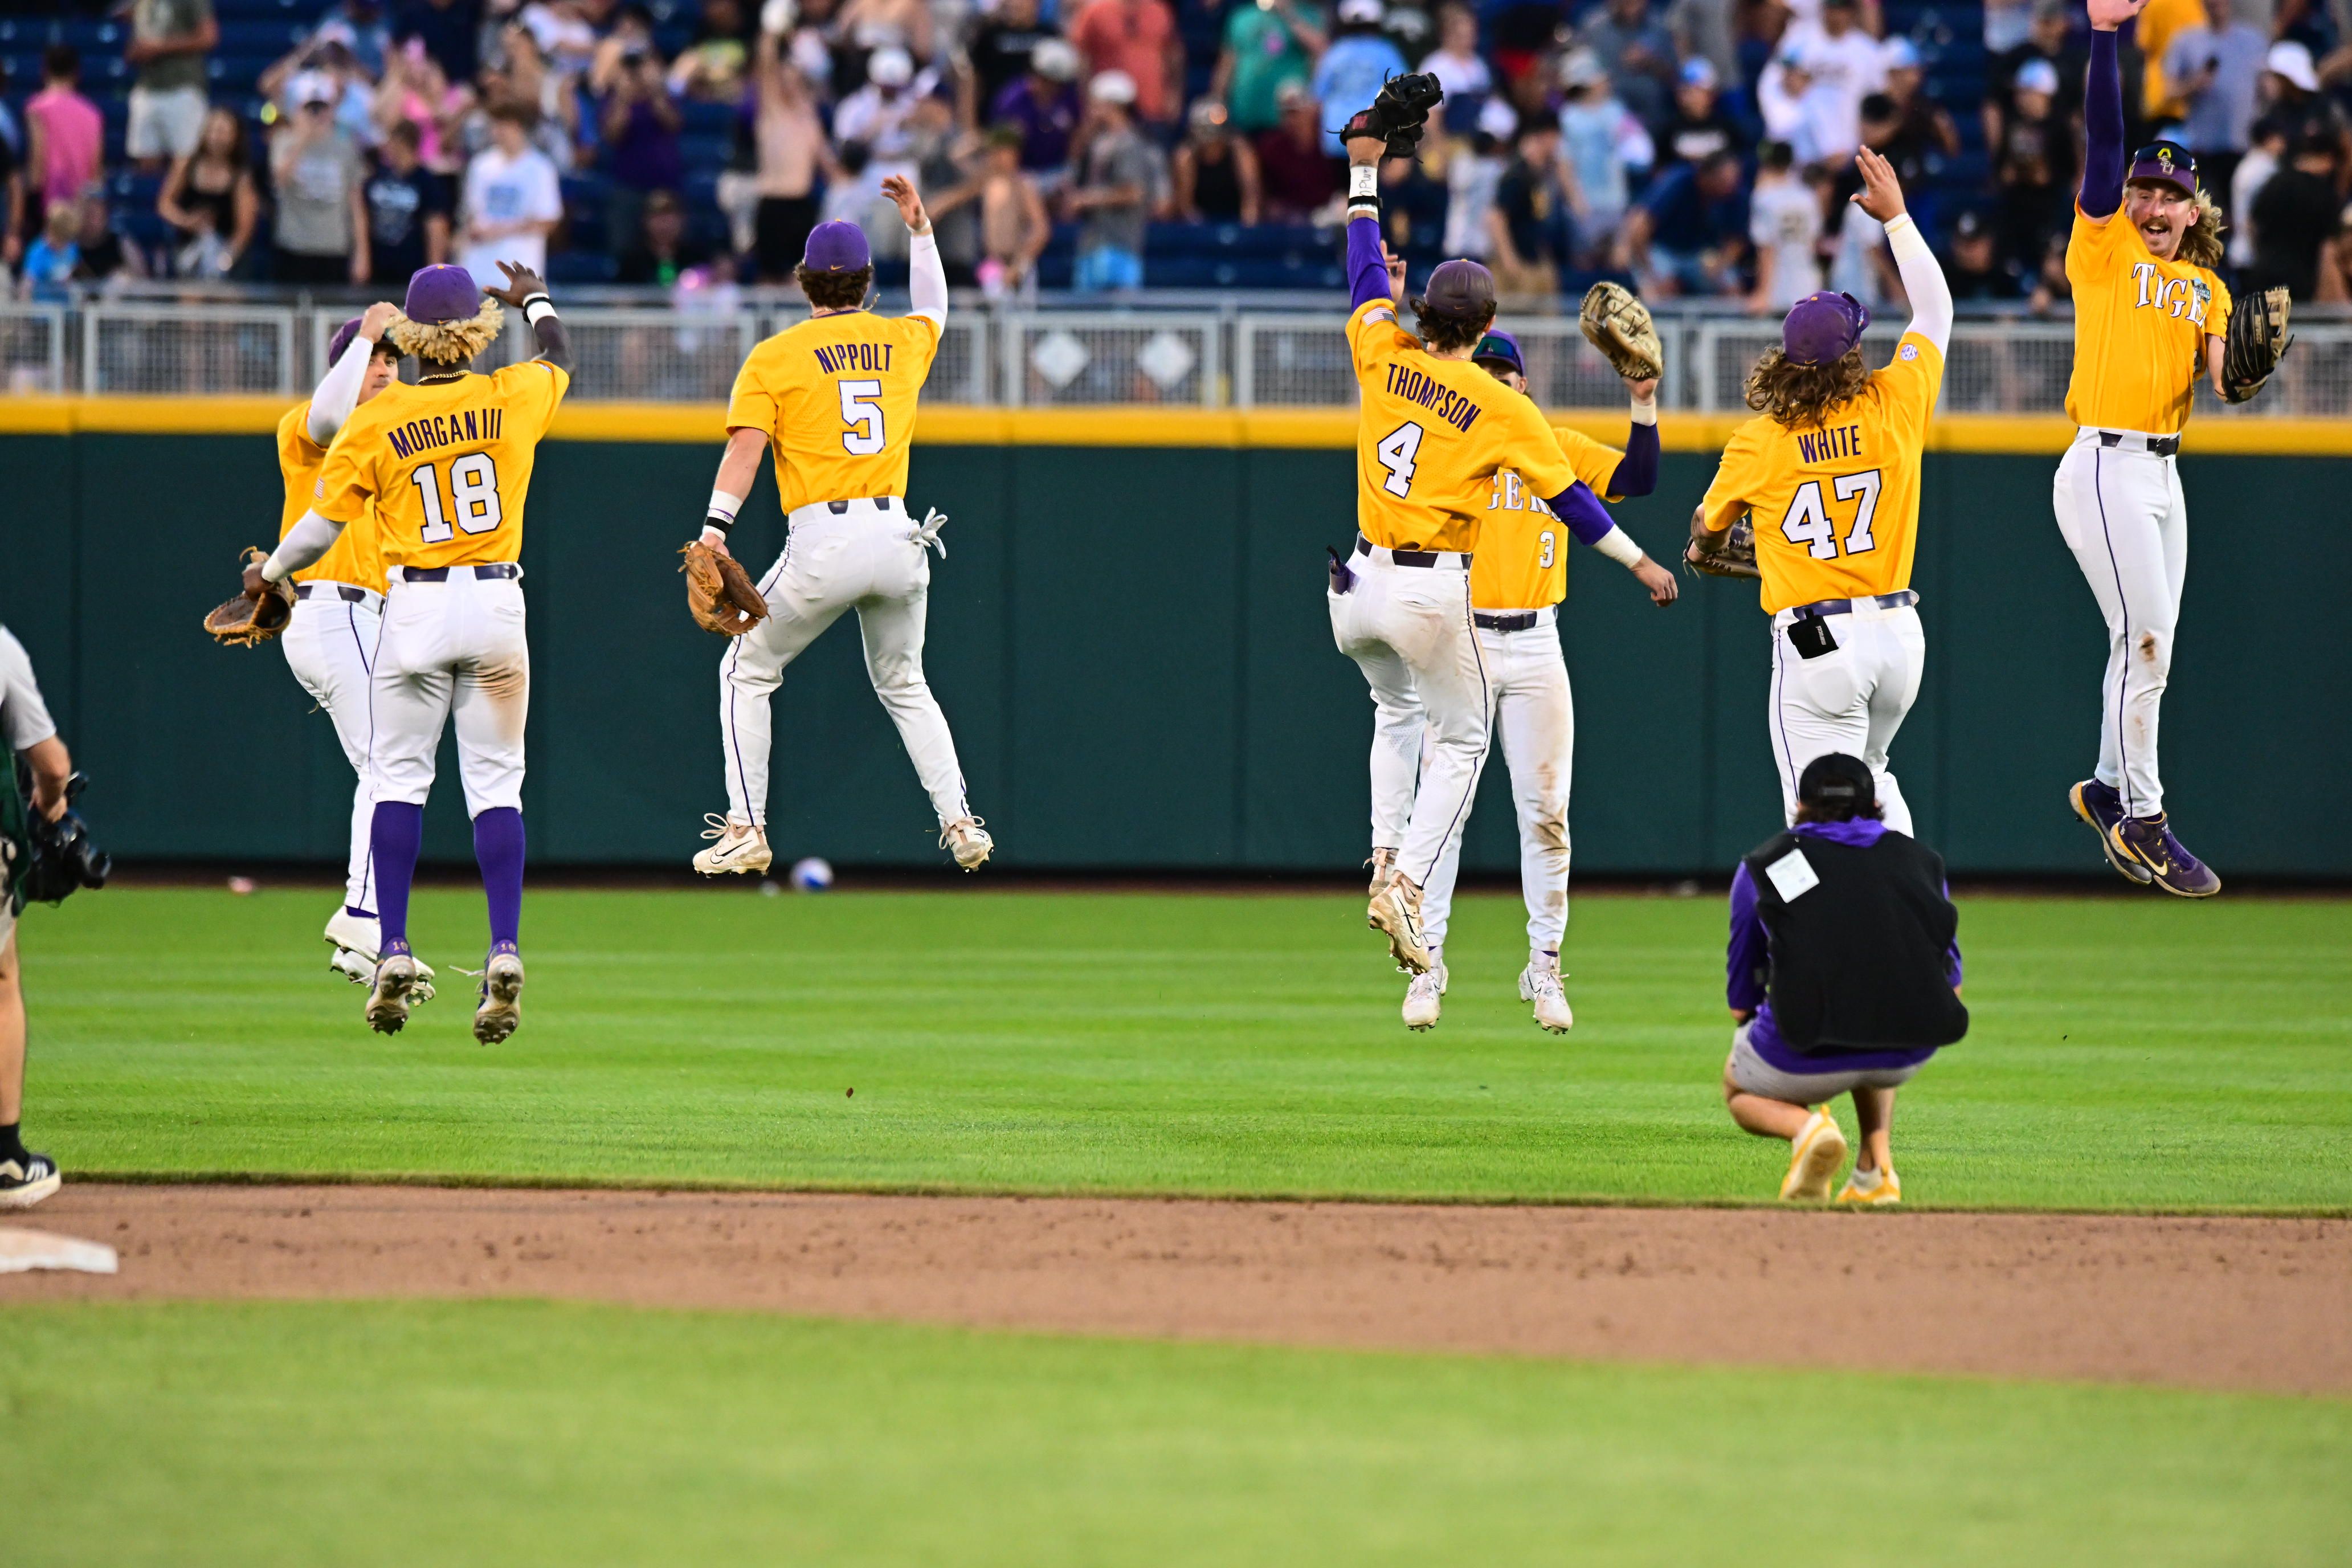 LSU players jump in yellow jerseys after winning a game against Wake Forest